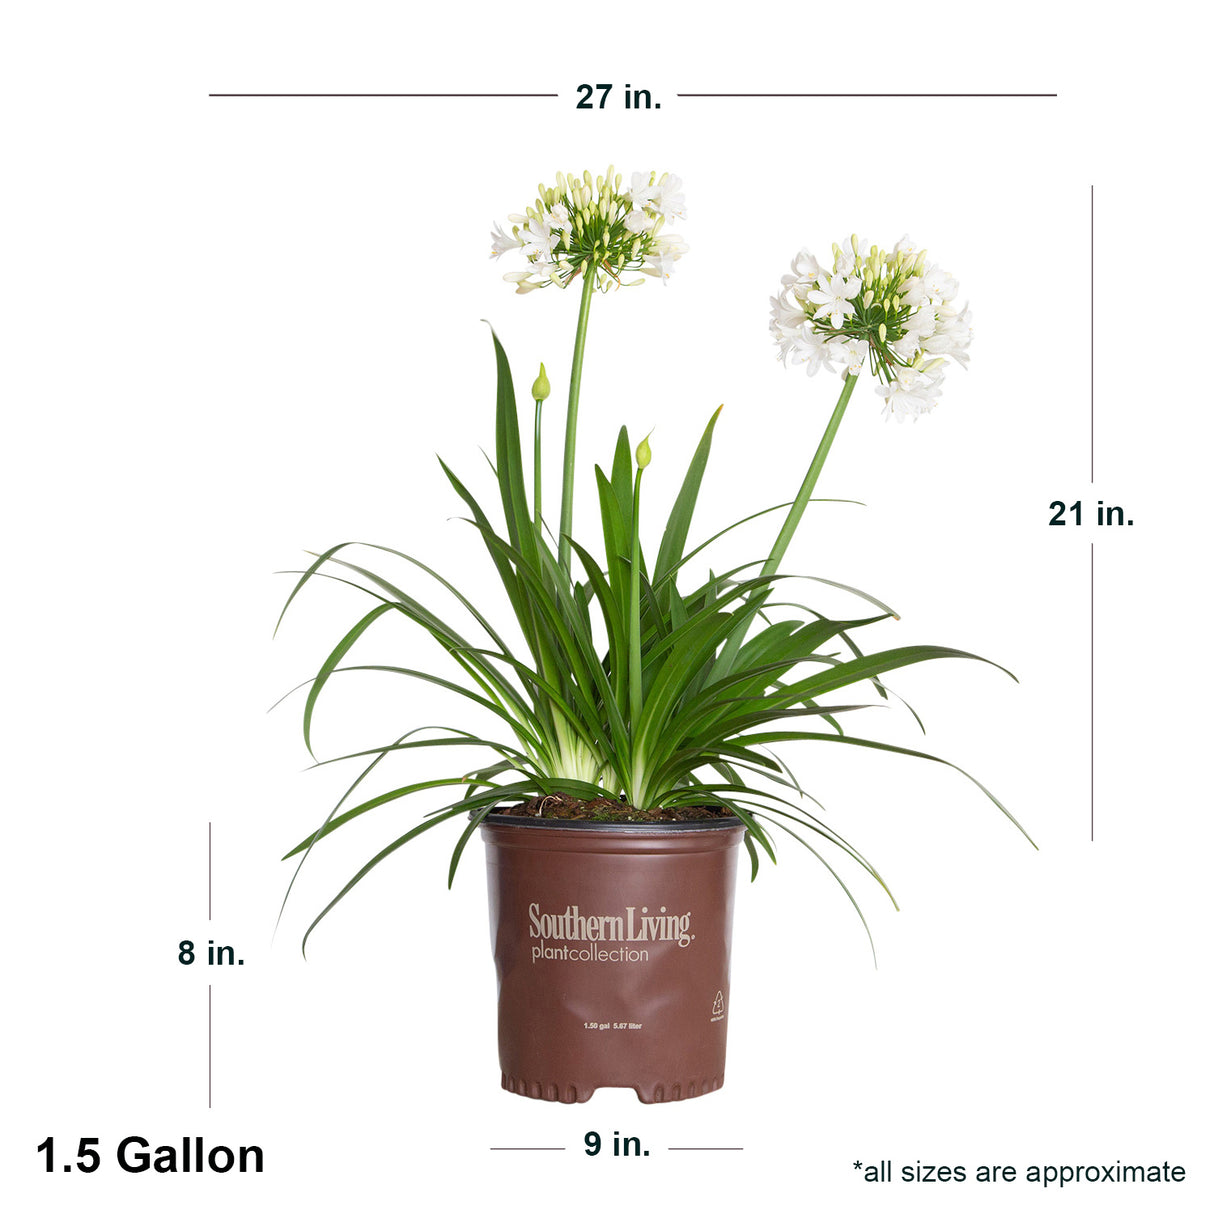 1.5 gallon Ever White Agapanthus in southern living container showing dimensions